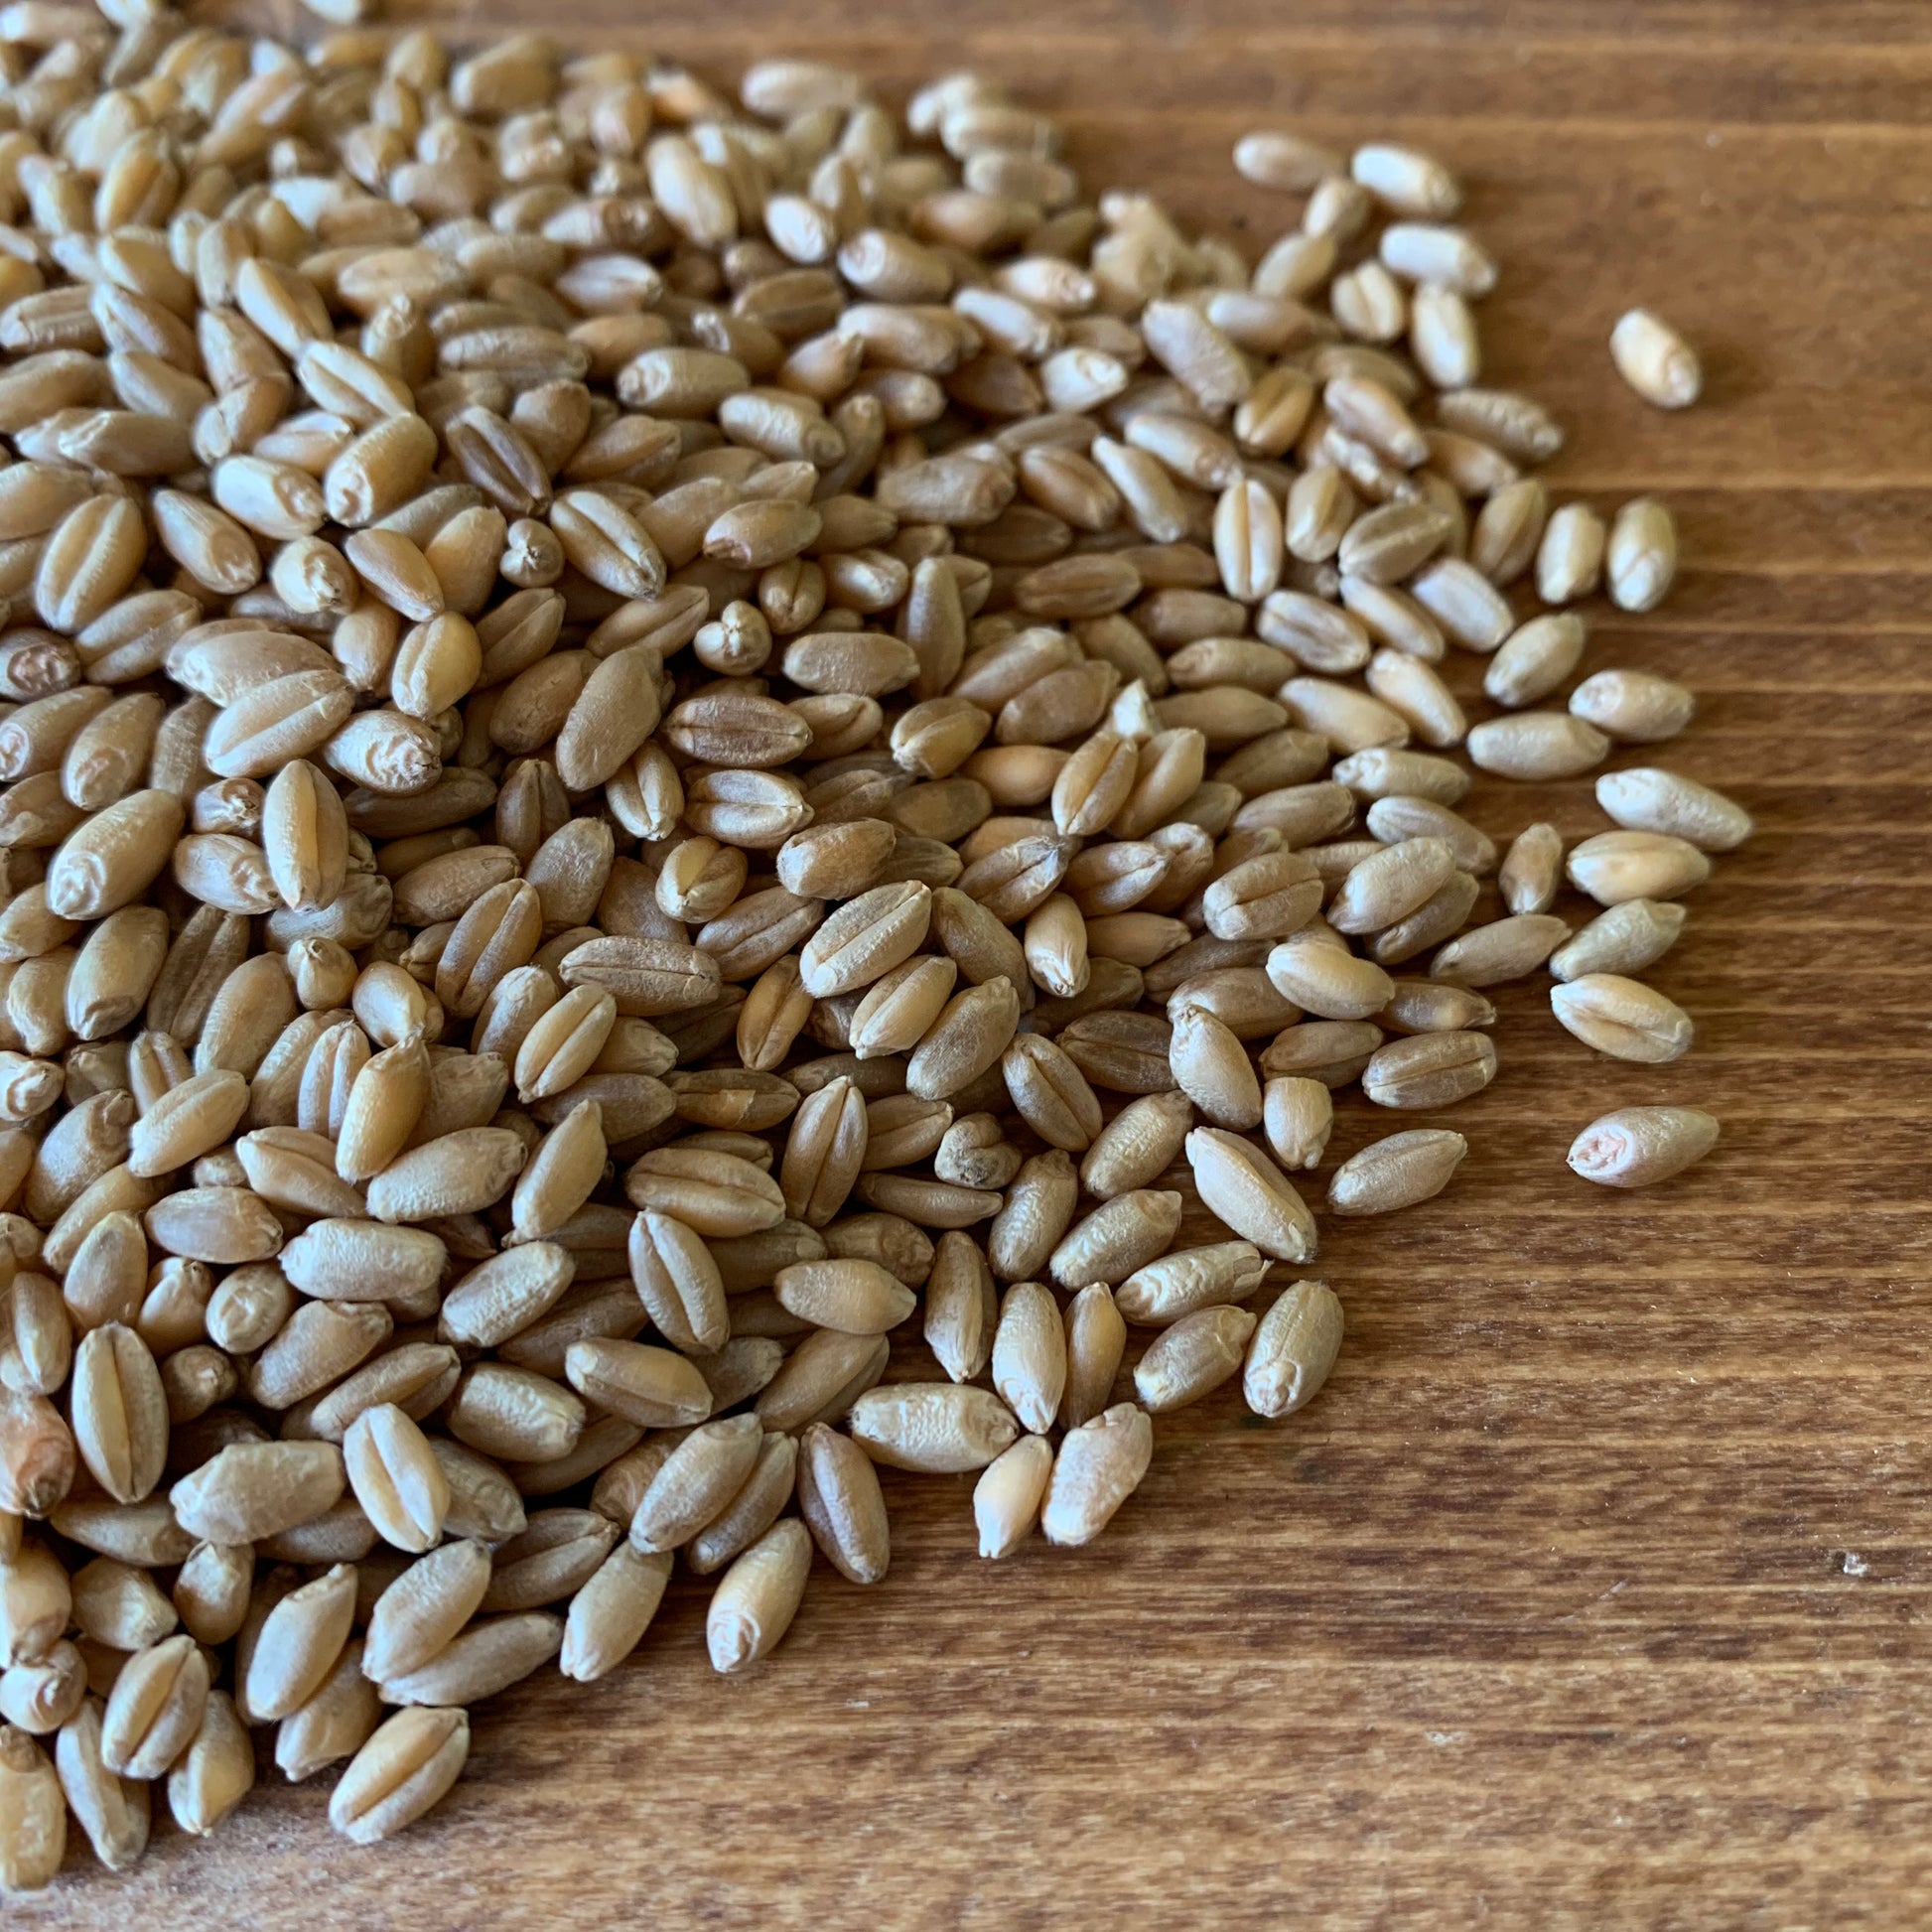 Living Sky Farm's Hard White Wheat Berries on a brown table.